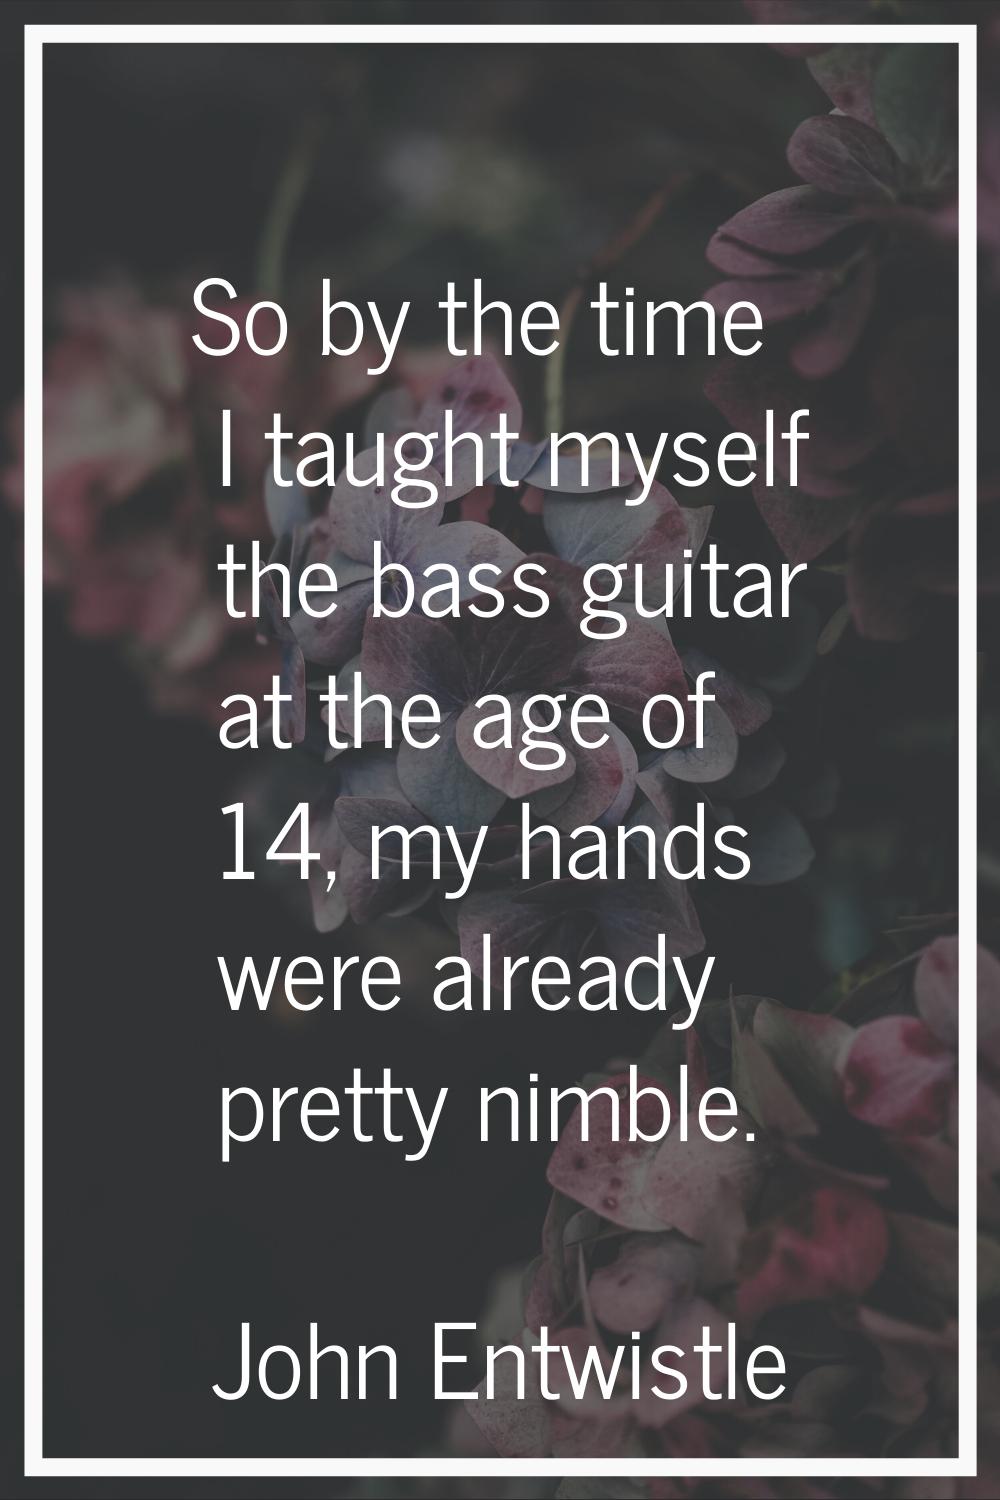 So by the time I taught myself the bass guitar at the age of 14, my hands were already pretty nimbl